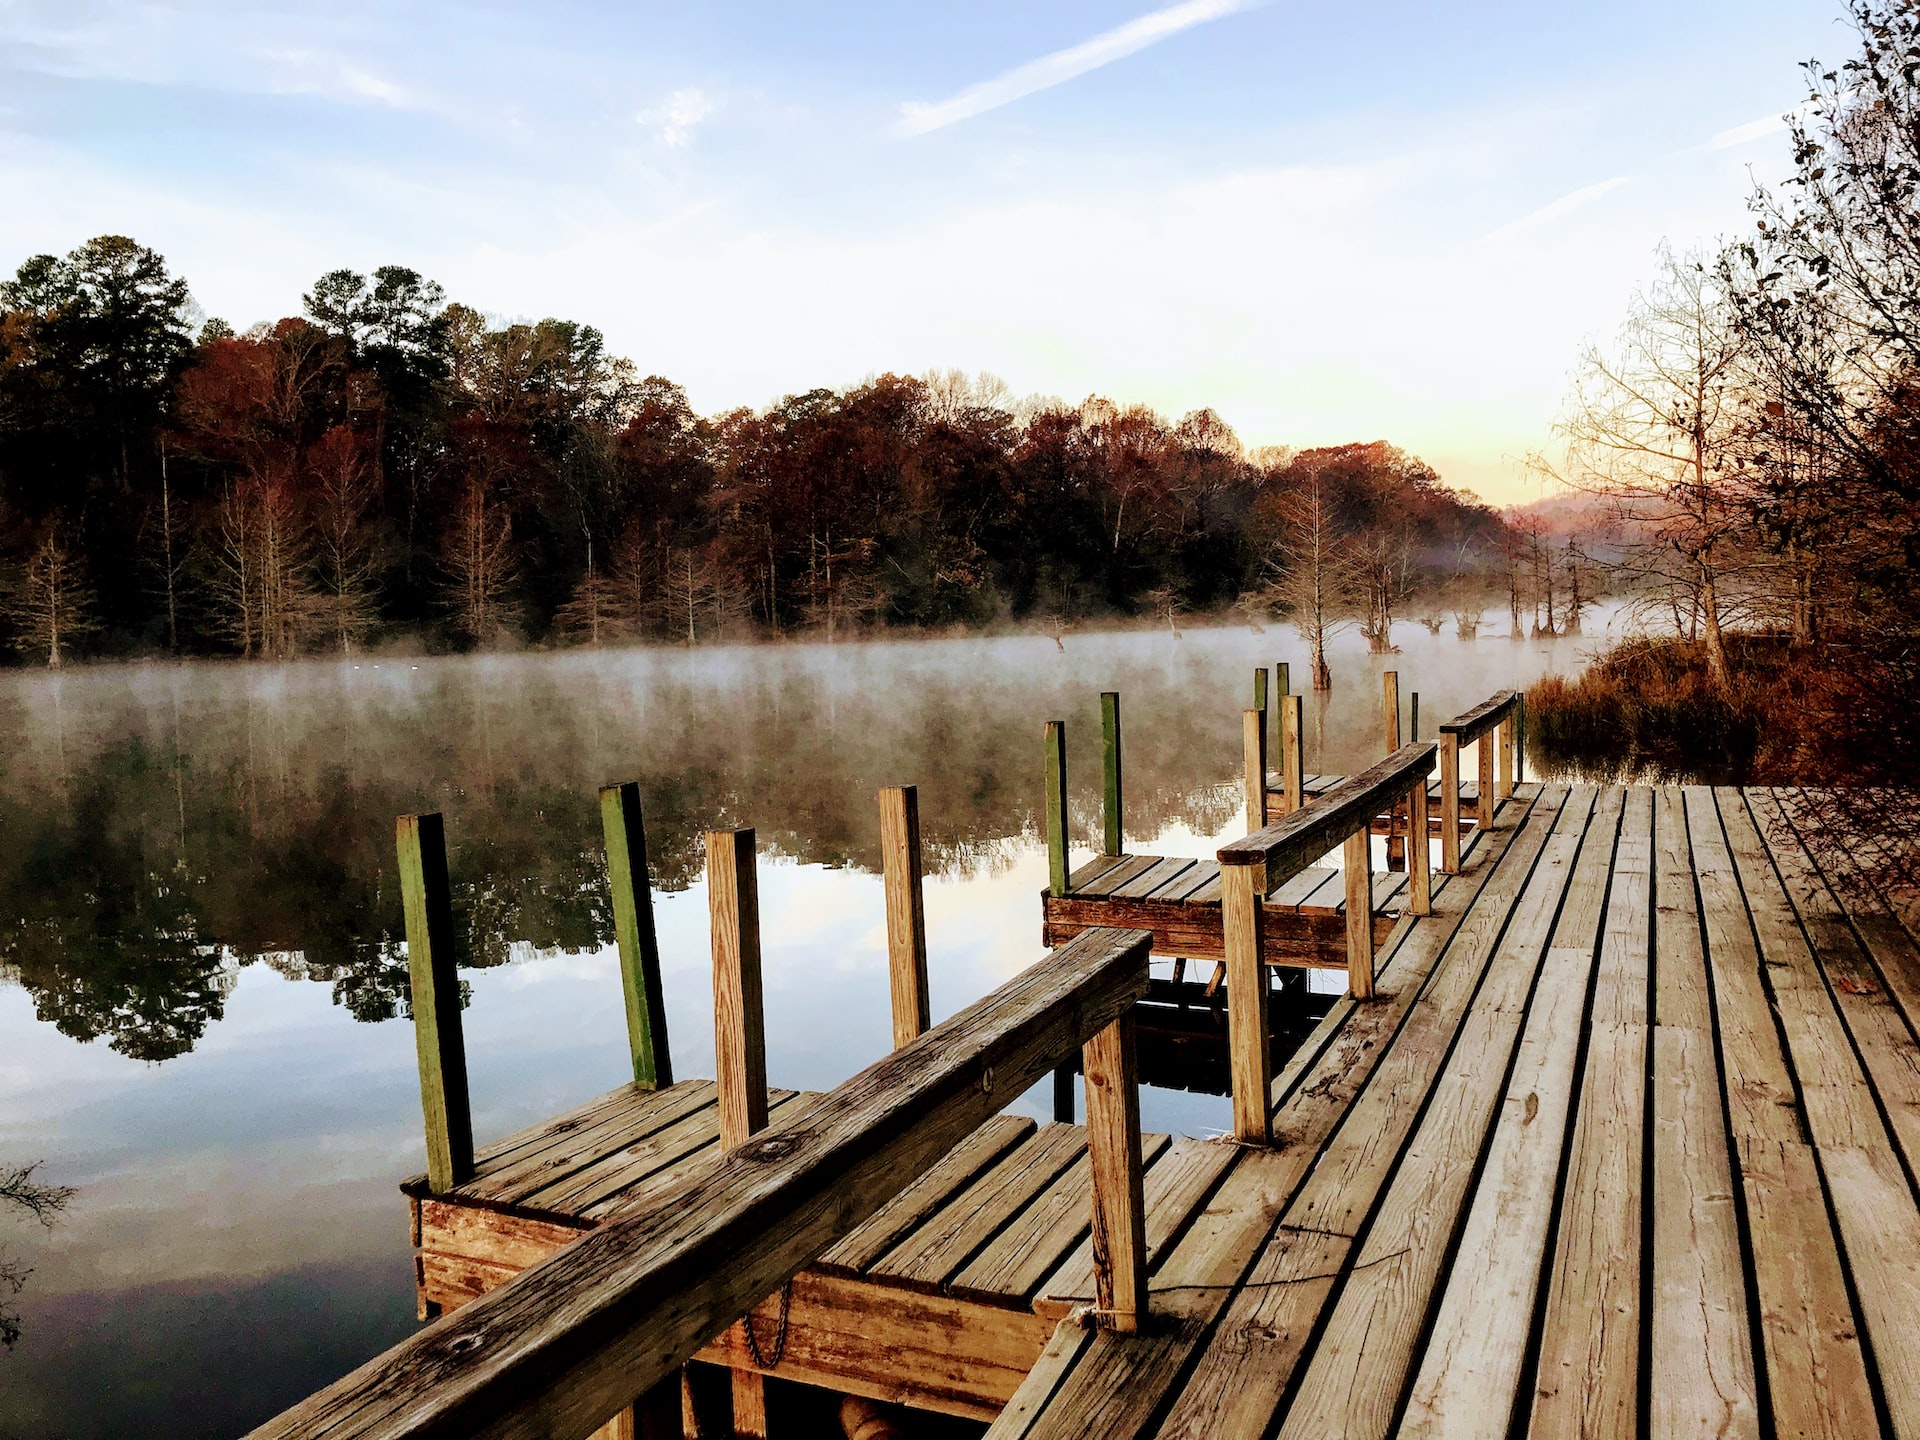 A dock along a river found in Beavers Bend State Park.